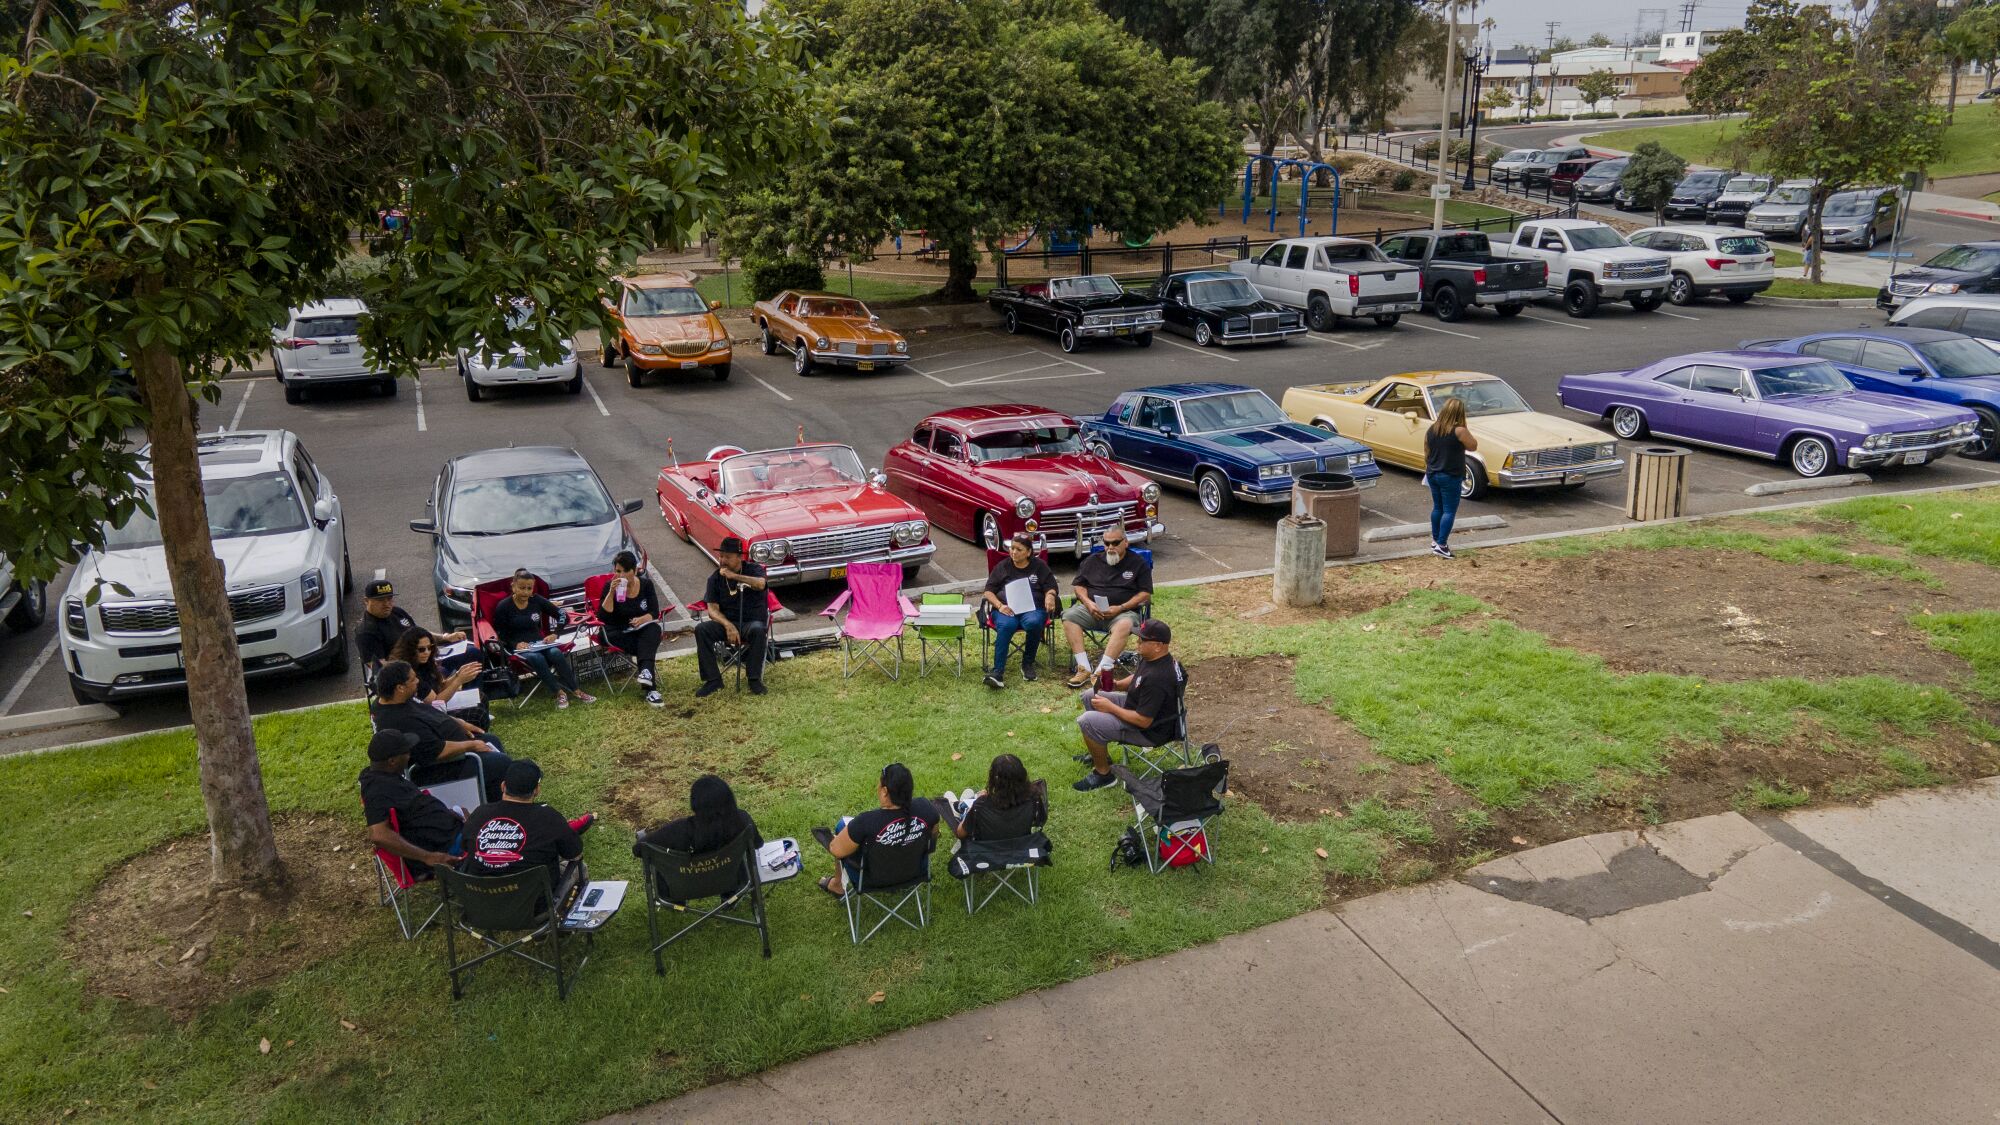 The United Lowrider Coalition meets at Kimball Park